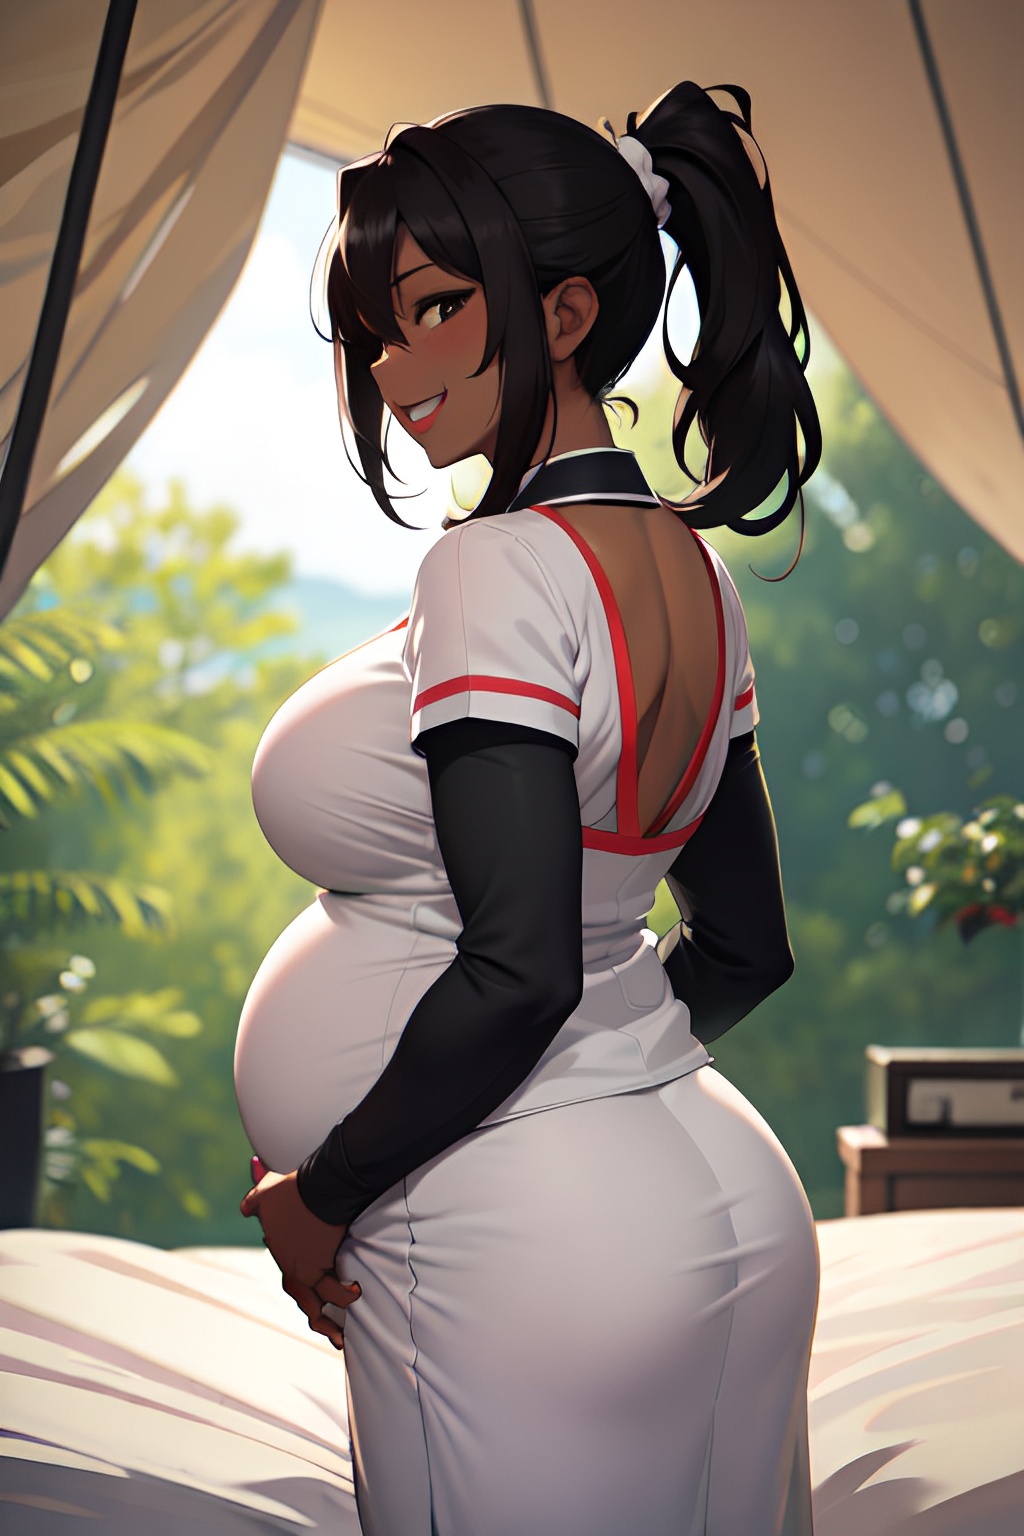 30s Cartoon Porn - Anime Pregnant Huge Boobs 30s Age Laughing Face Ginger Ponytail Hair Style  Dark Skin Charcoal Tent Back View Cumshot Nurse 3666503200556321660 - AI  Hentai